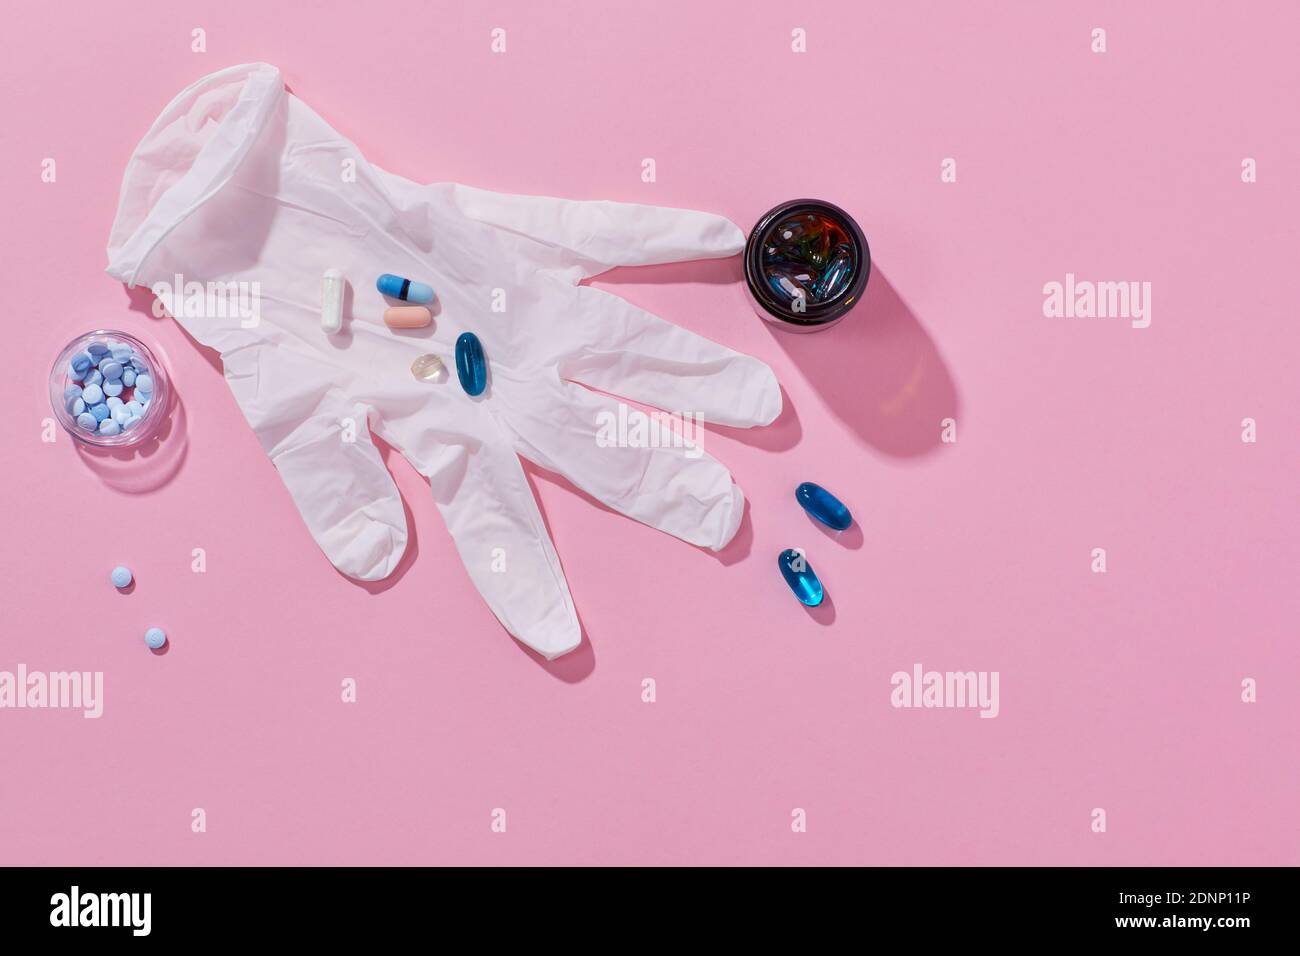 Pills on surgical glove on pink background Stock Photo